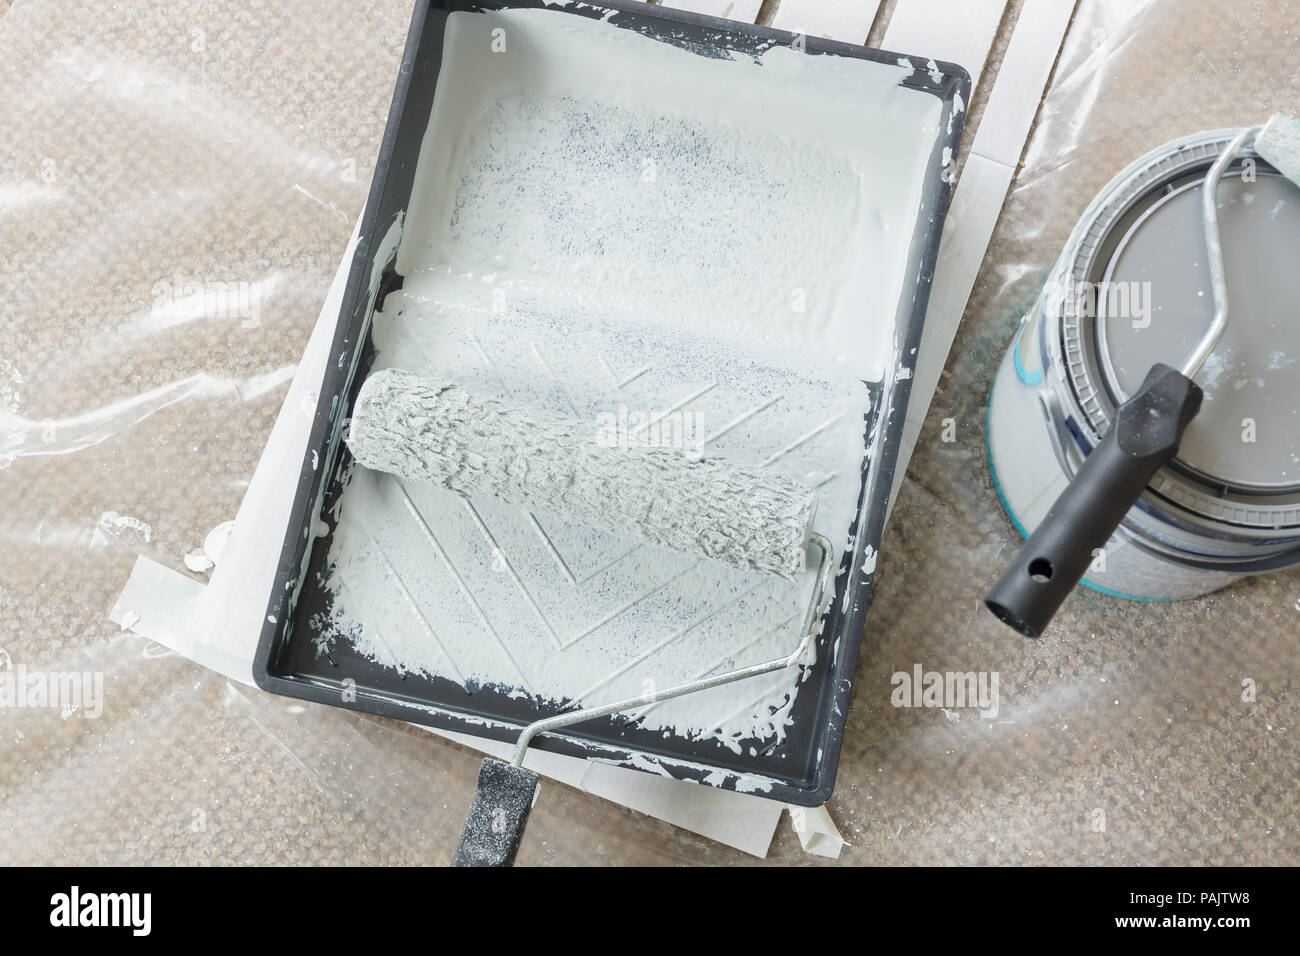 Painting and decorating with rollers and tray filled with light grey paint on a plastic dust sheet with cans in the background Stock Photo